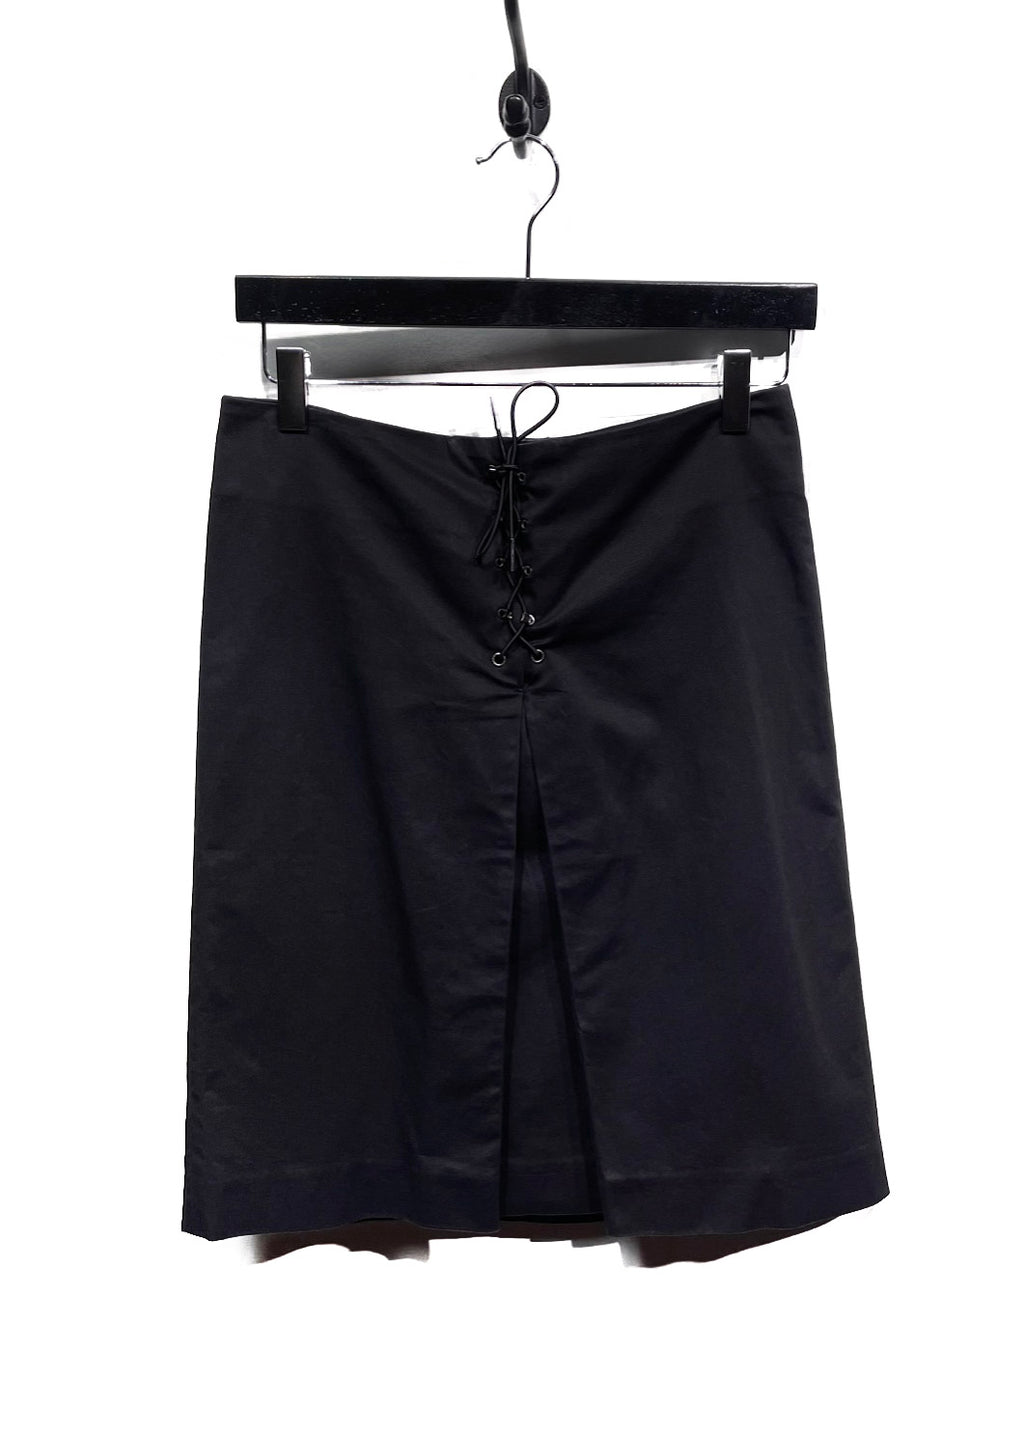 Gucci Black Lace-Up Skirt